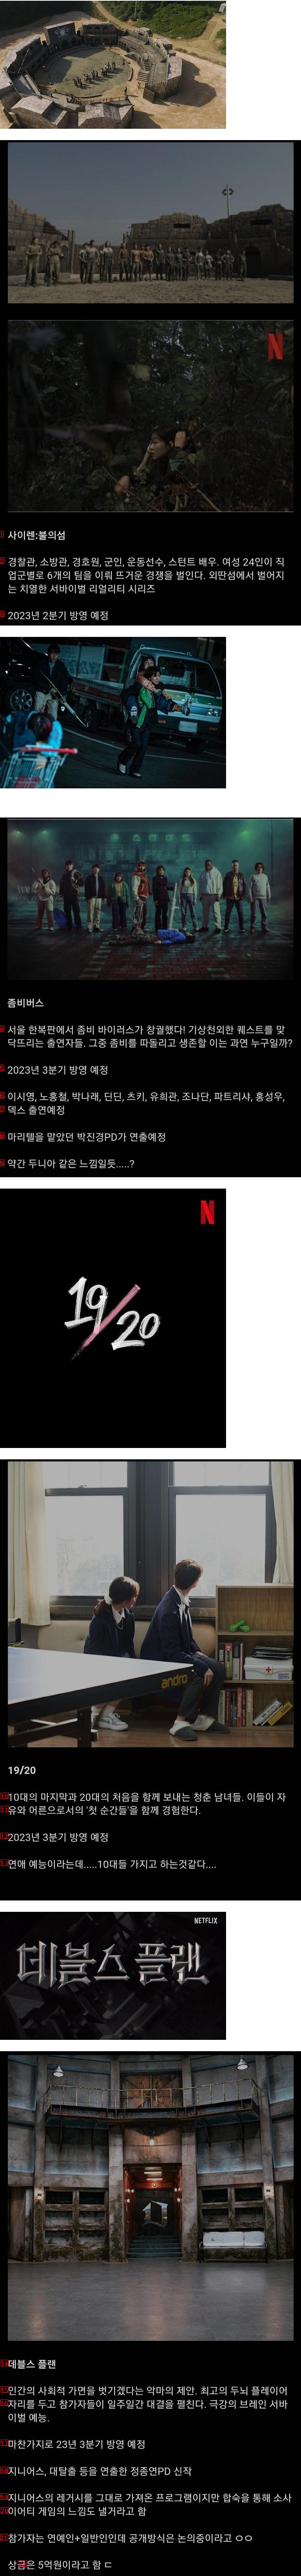 Variety show "DJPG" released on Netflix after Physical 100.